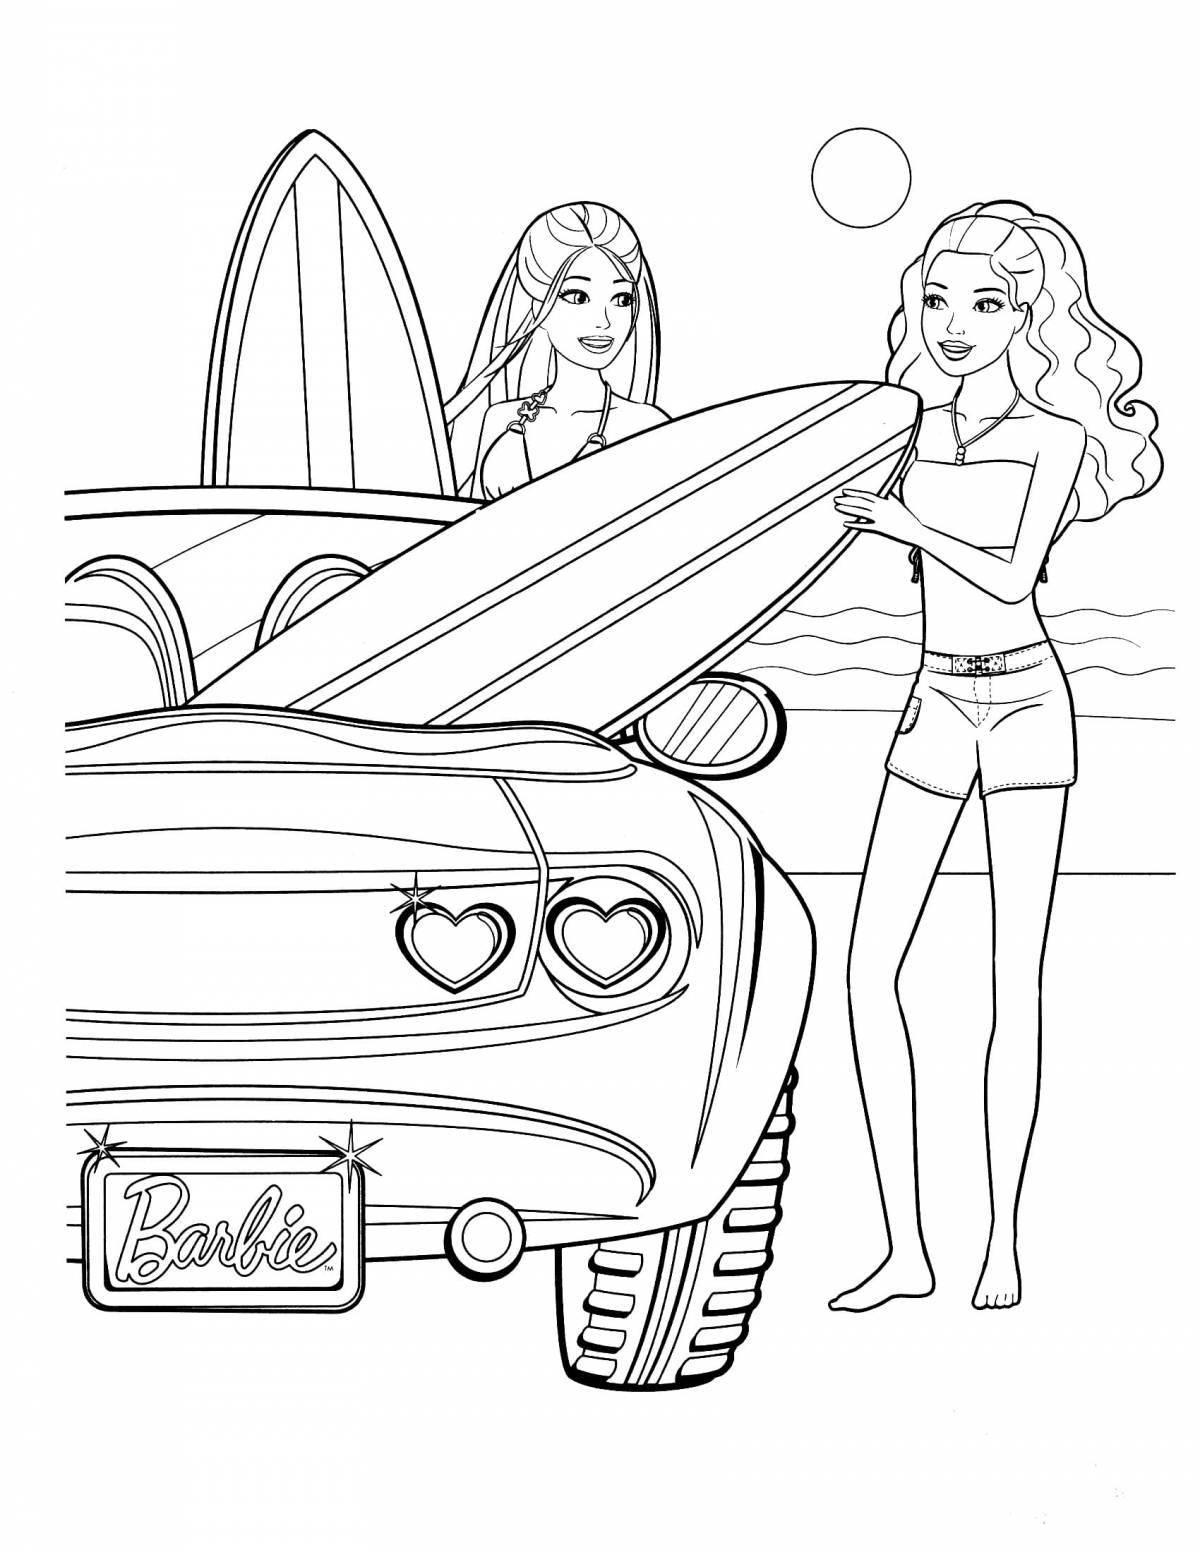 Shiny barbie in the sea coloring book